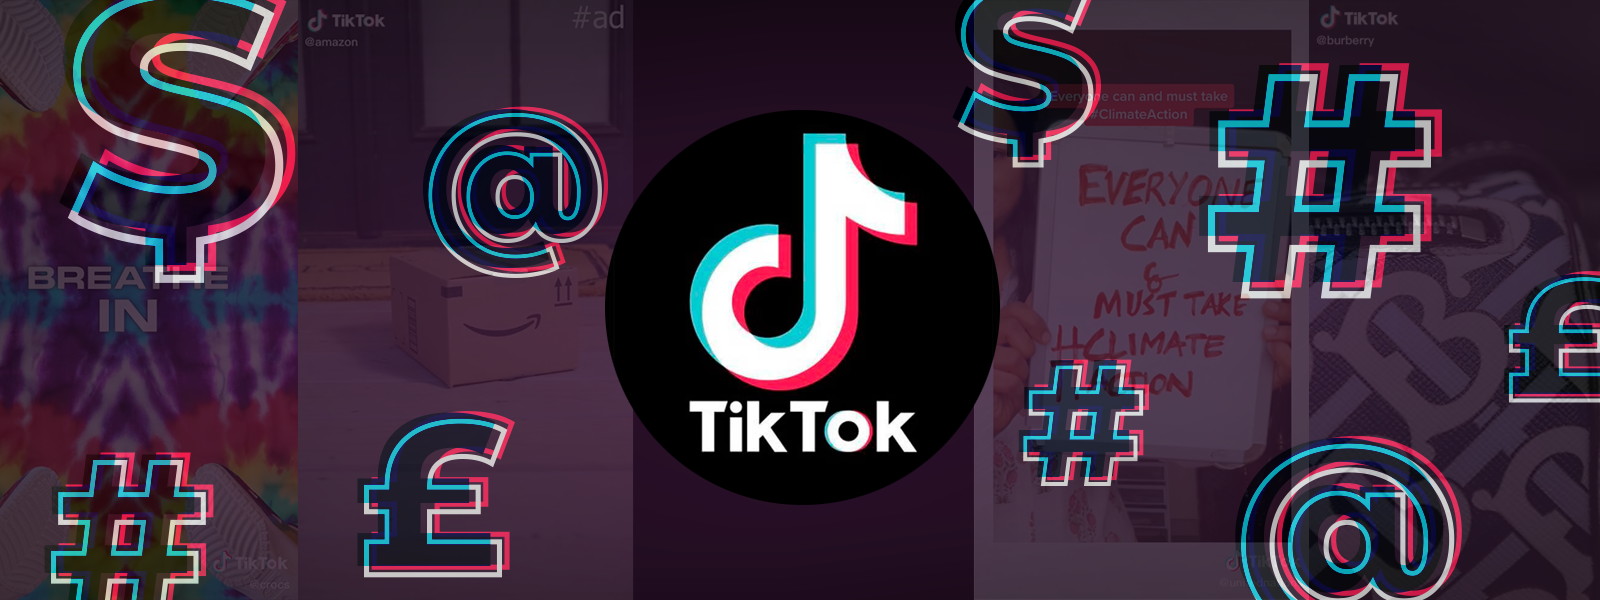 Ubiquitous offers side hustle, paying users to watch TikTok